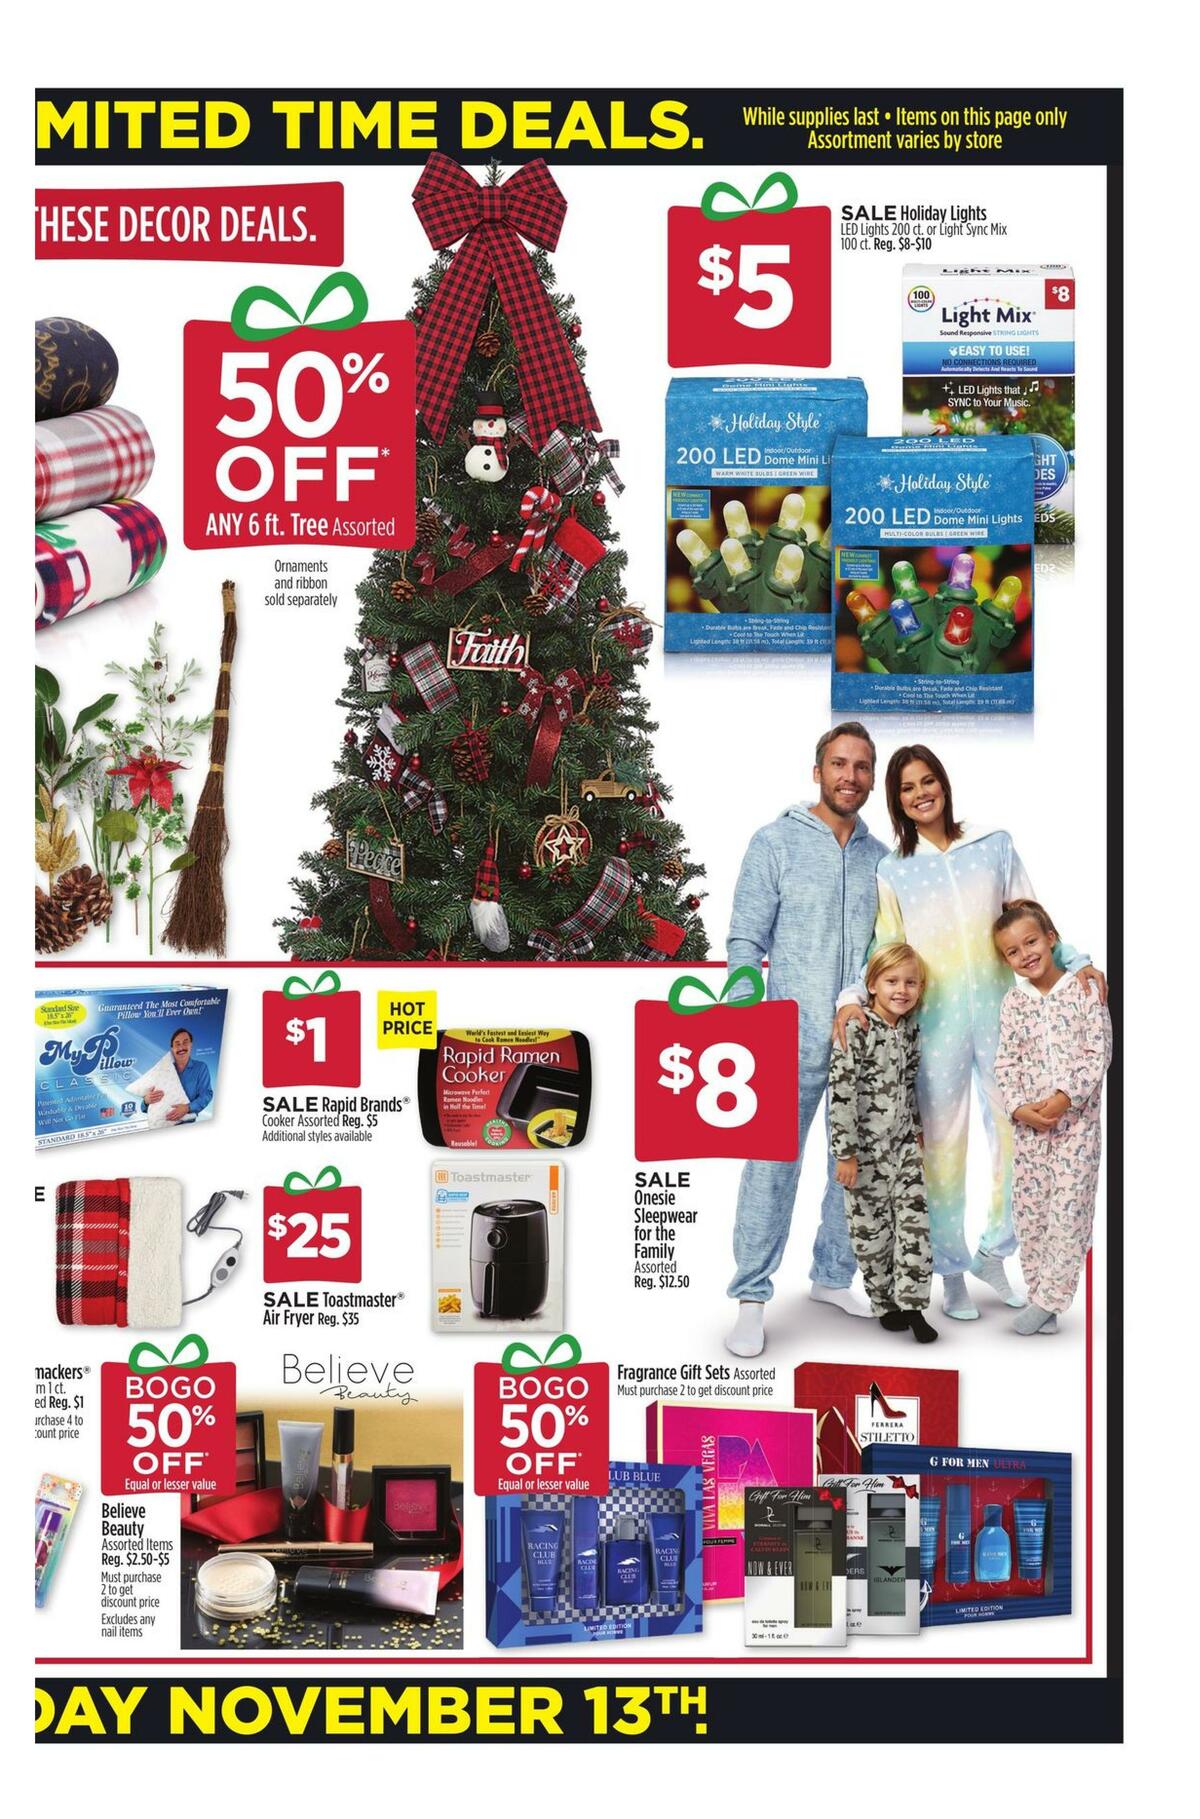 Dollar General Pre Holiday Event Weekly Ad from November 13